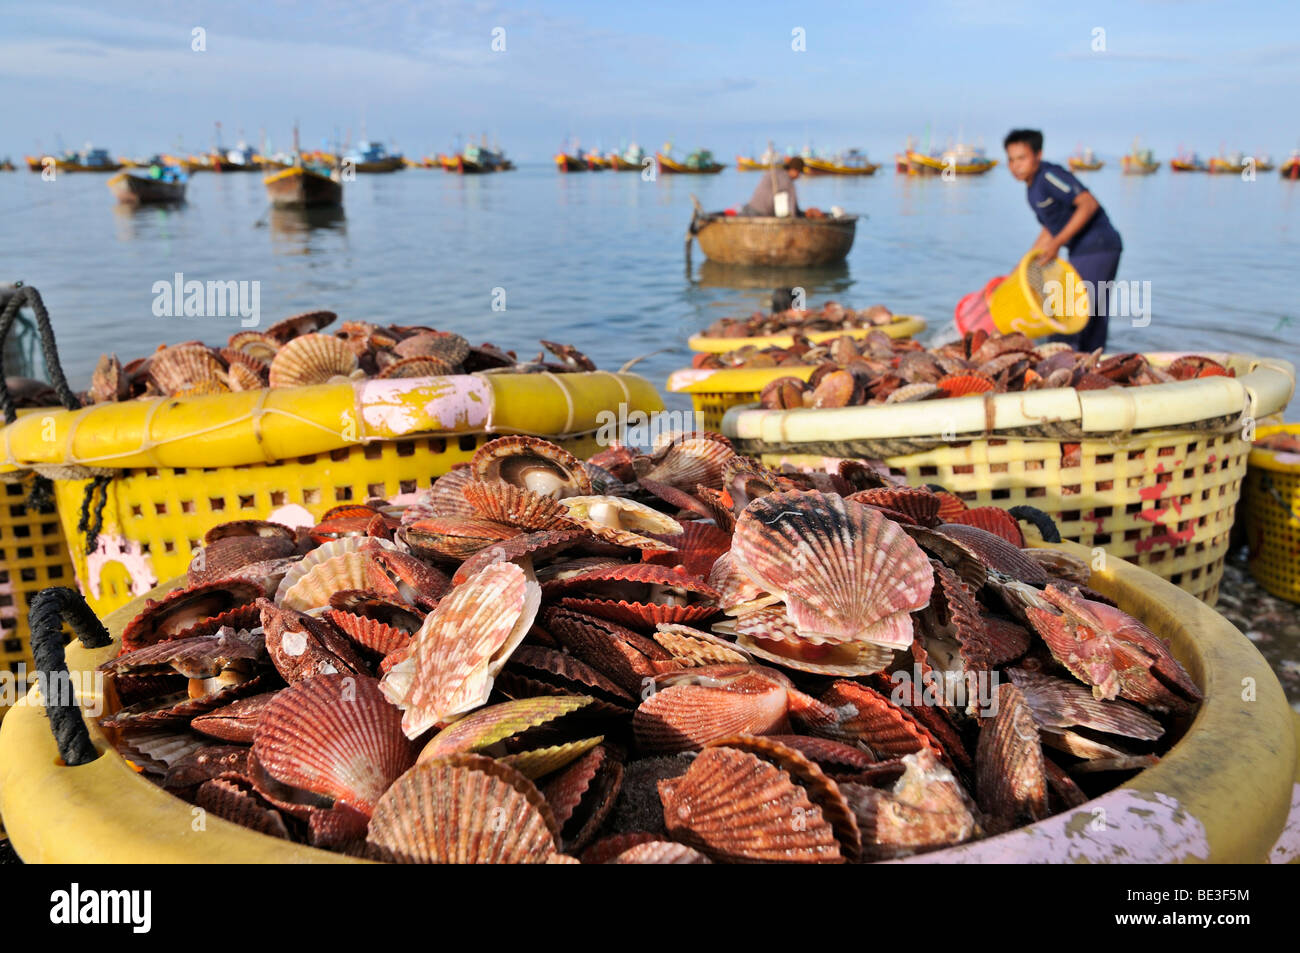 Scallop shells in a basket in front of fishing boats and fishermen on the water, Mui Ne, Vietnam, Asia Stock Photo